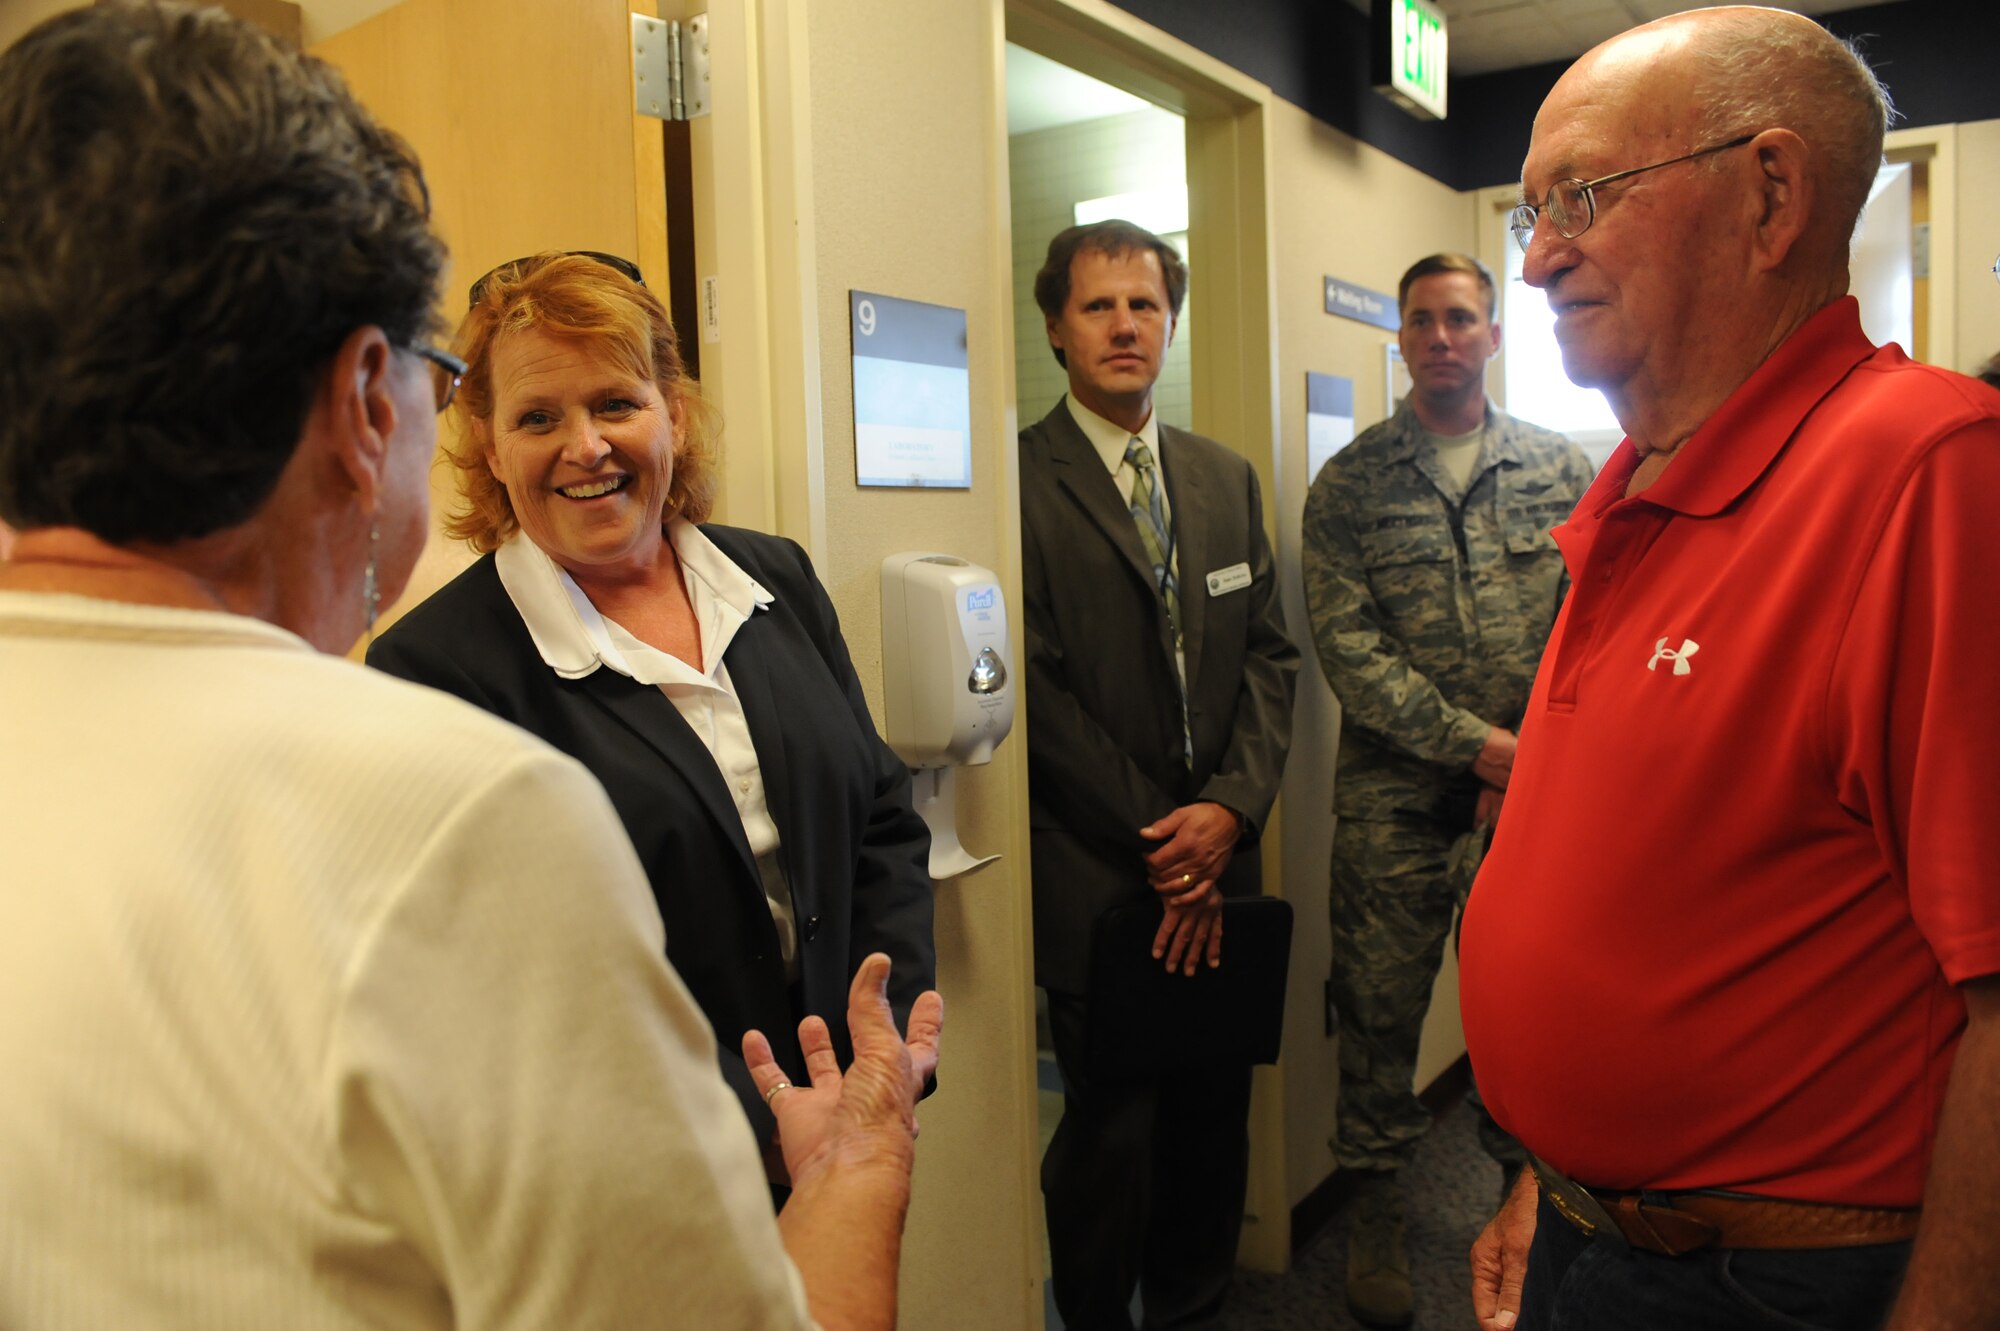 North Dakota Senator Heidi Heitkamp, visits the staff of the Veterans Affairs Clinic, and discusses policies and challenges for the facility at Minot Air Force Base, N.D., June 28. The tour of the base clinic is one of several visits she will be making to veterans facilities across the state to assess the establishments strengths and short comings. While at the base, Heitkamp was able to meet veterans and their families face to face and learn firsthand about the care and assistance that they are able to receive at the base VA clinic. (U.S. Air Force photo/Airman 1st Class Stephanie Ashley)